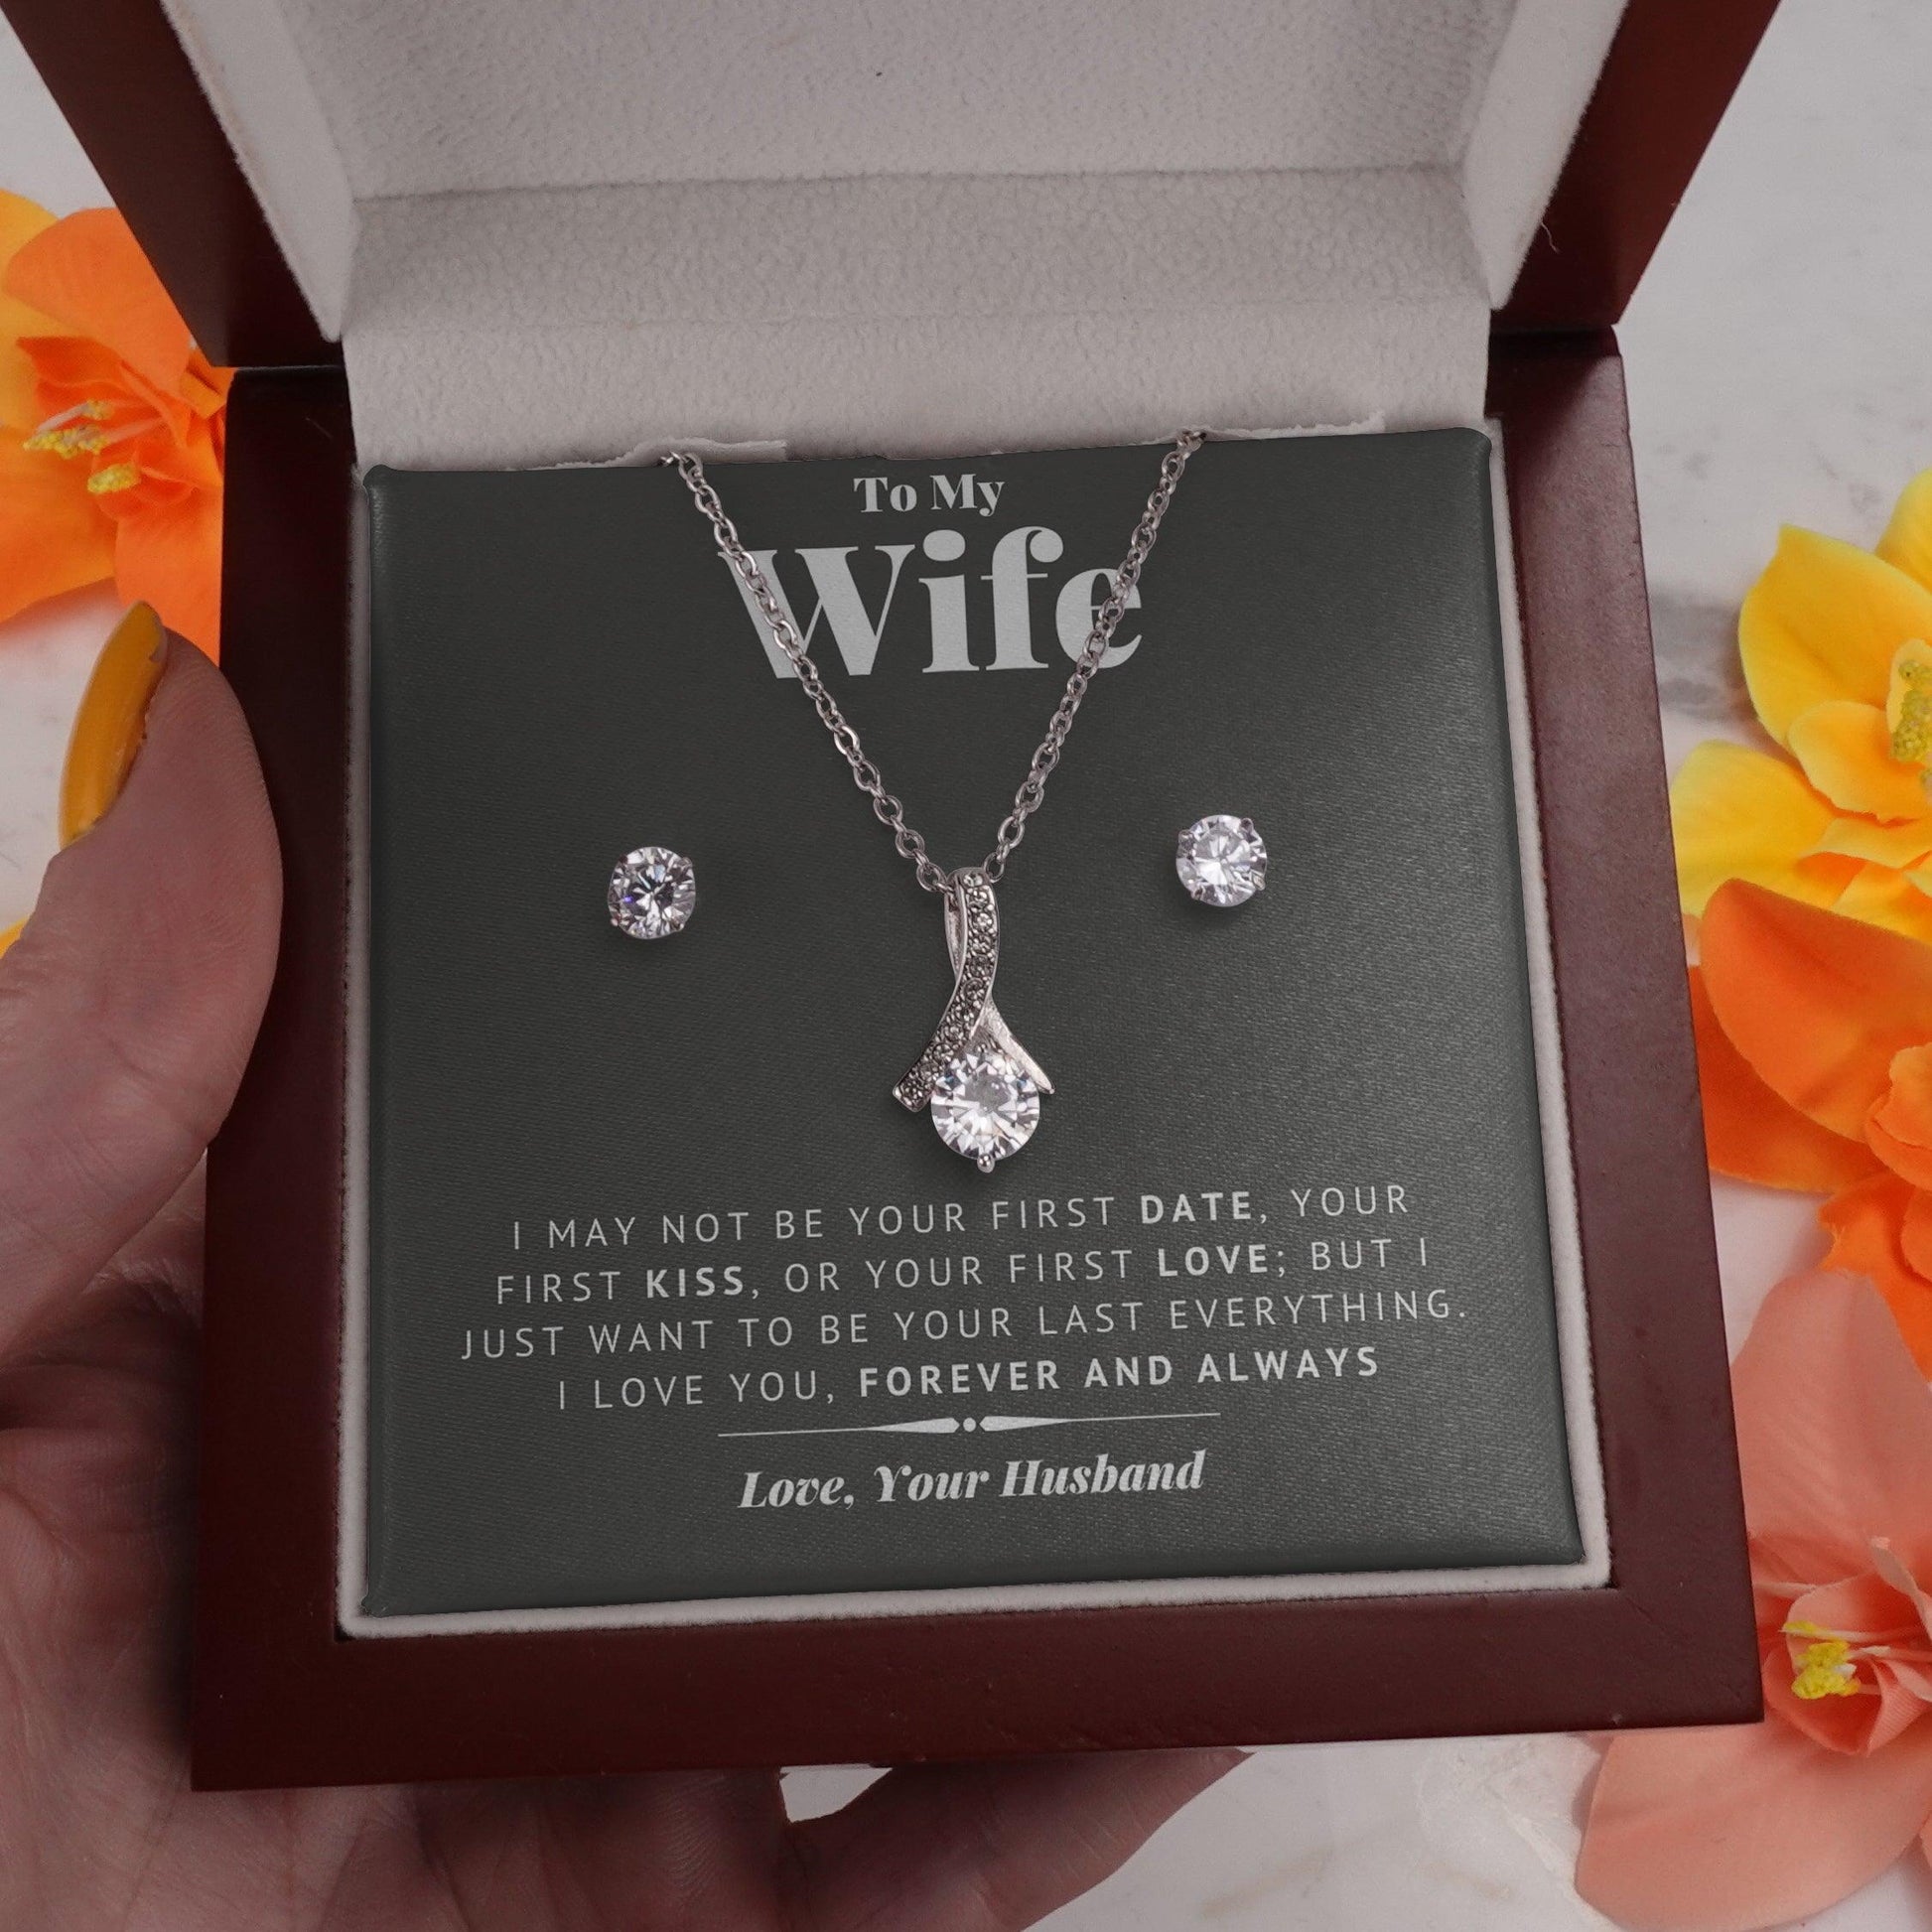 Jewelry gifts Wife - Alluring Gift Set - Belesmé - Memorable Jewelry Gifts 